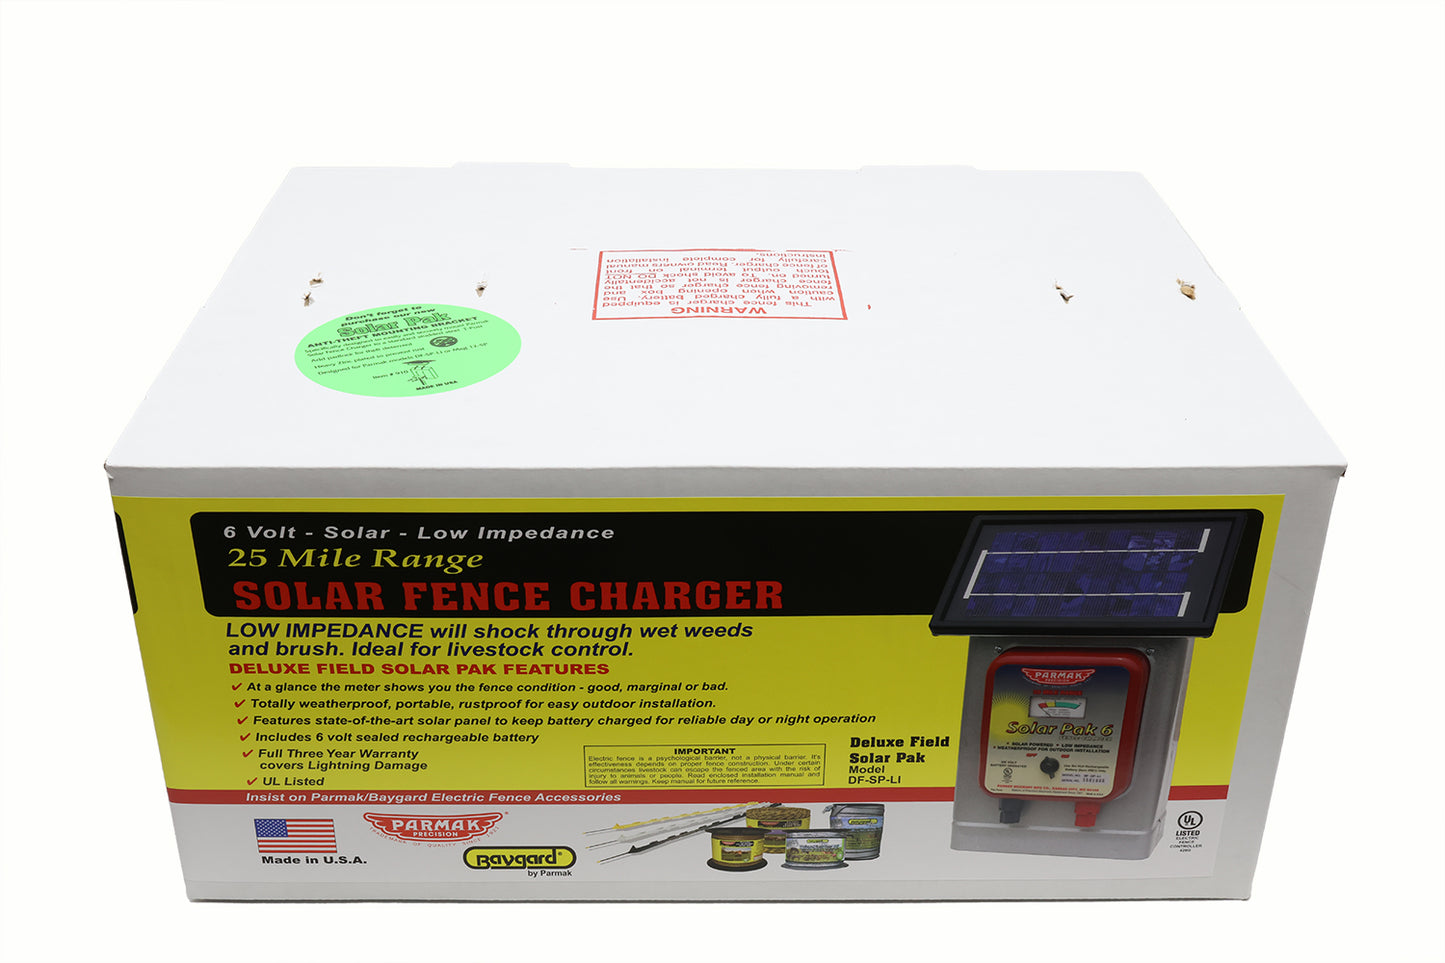 Parmak Deluxe Field Solar Pak 6V. Solar Fence Charger - 102111